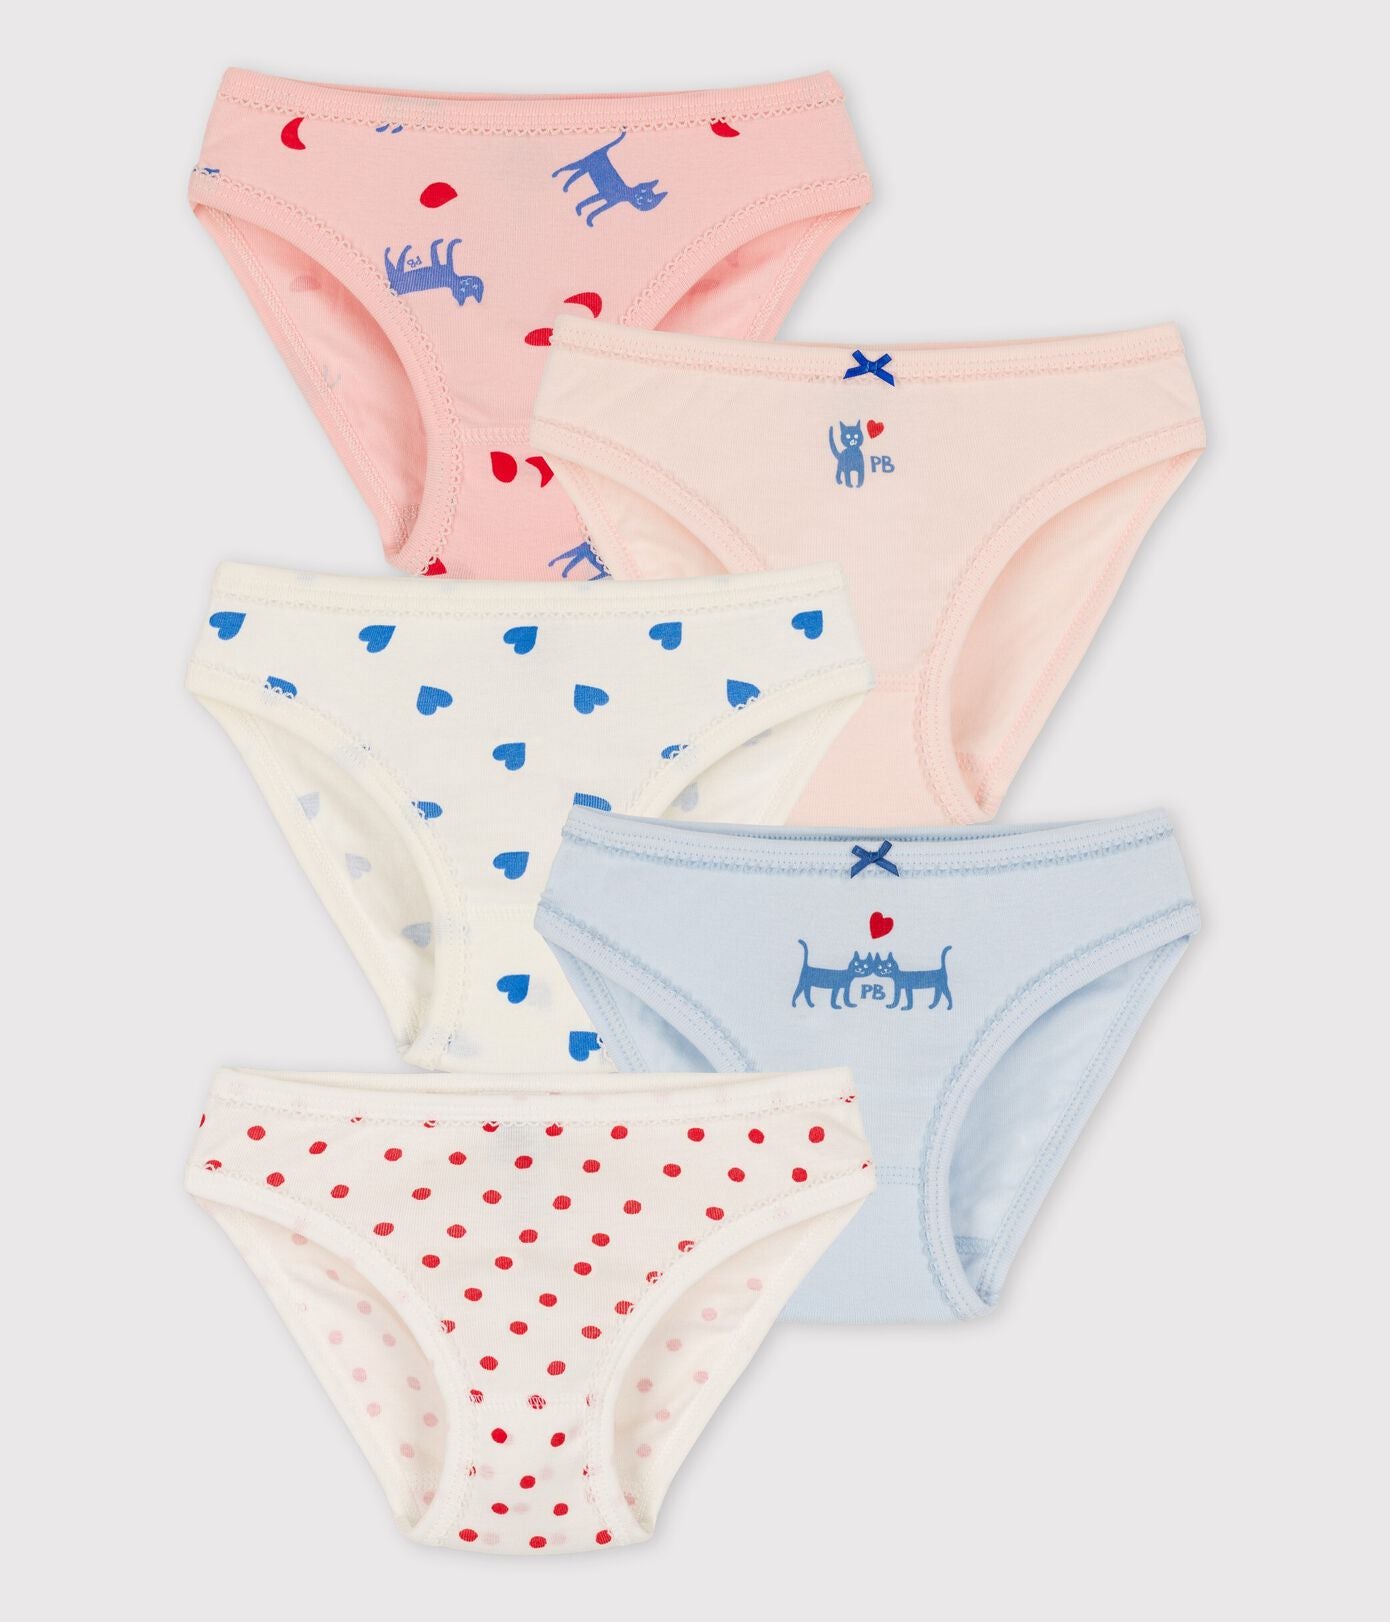 Girls White Cotton Knickers (5 Pack)